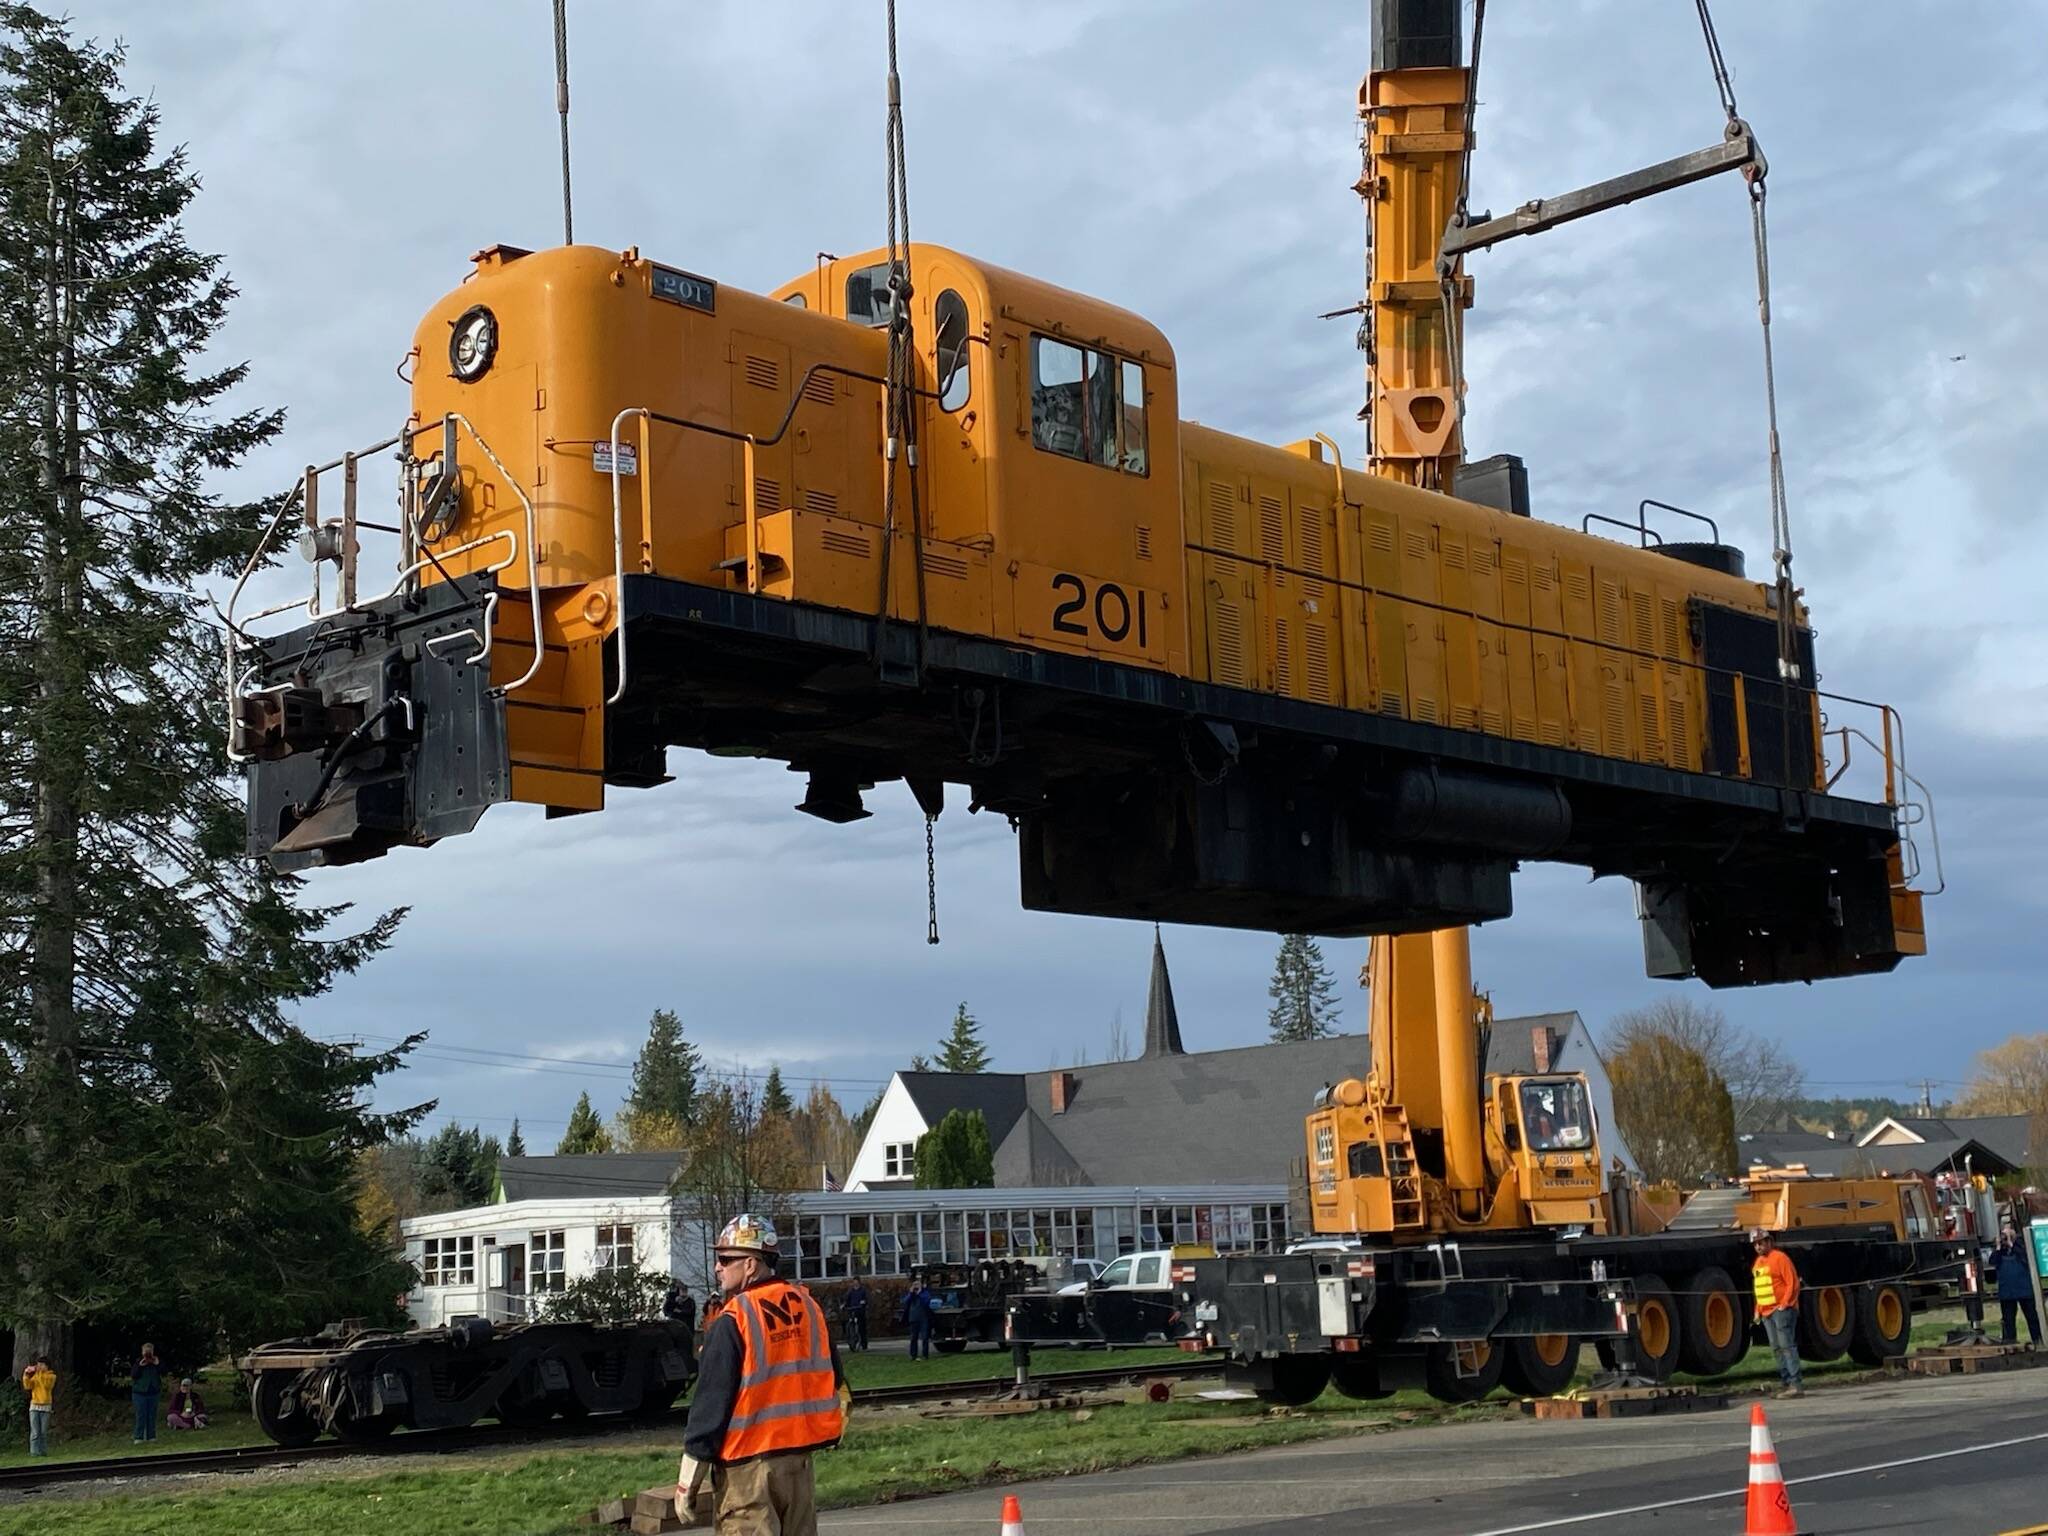 Workers lift Locomotive 201 to move it from Snoqualmie to the Nevada Northern Railway Foundation. Photo William Shaw/Valley Record.